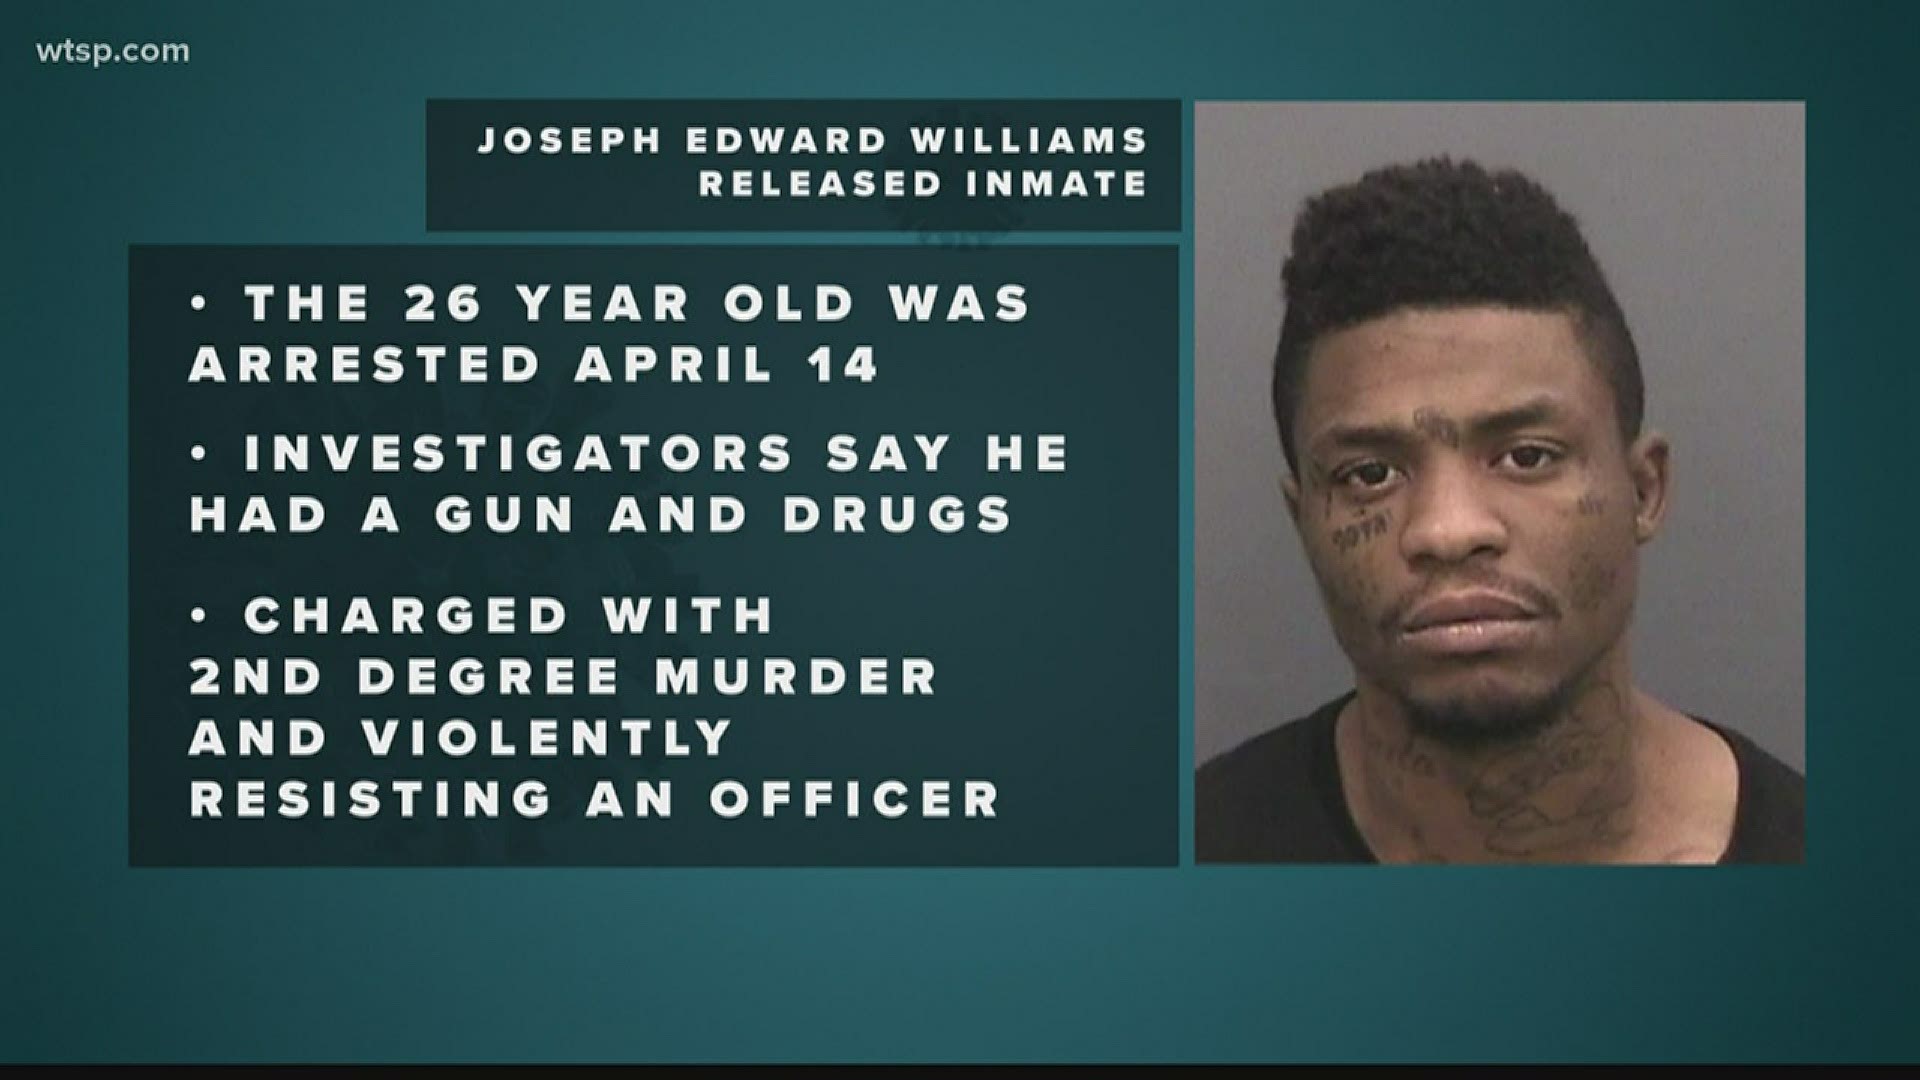 Joseph Edward Williams is charged with second-degree murder and resisting arrest. Now, he's behind bars without bond.